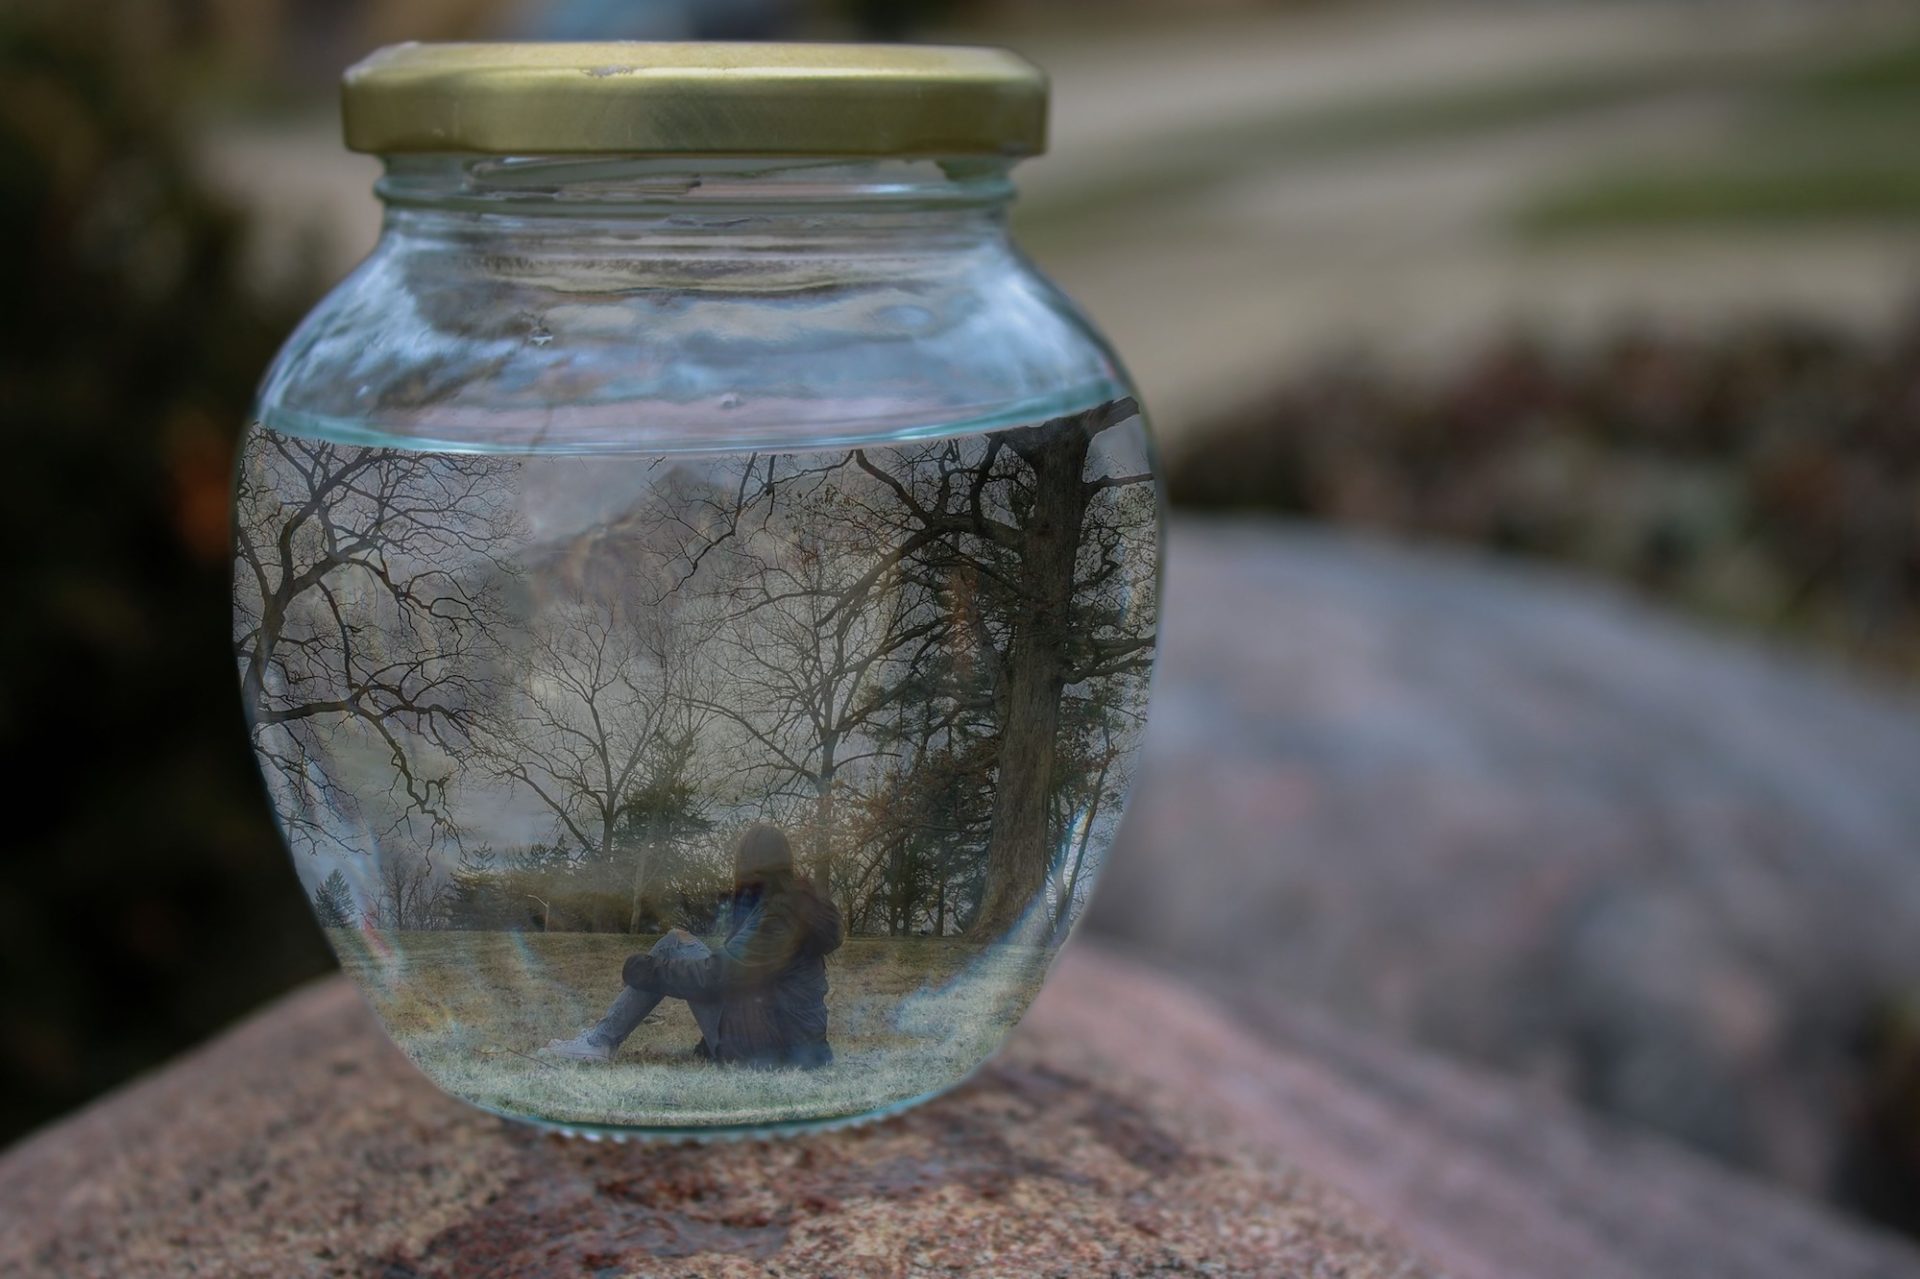 A large glass jar with gold lid sit outside. Inside the jar is a reflection of a person sitting surrounded by trees.